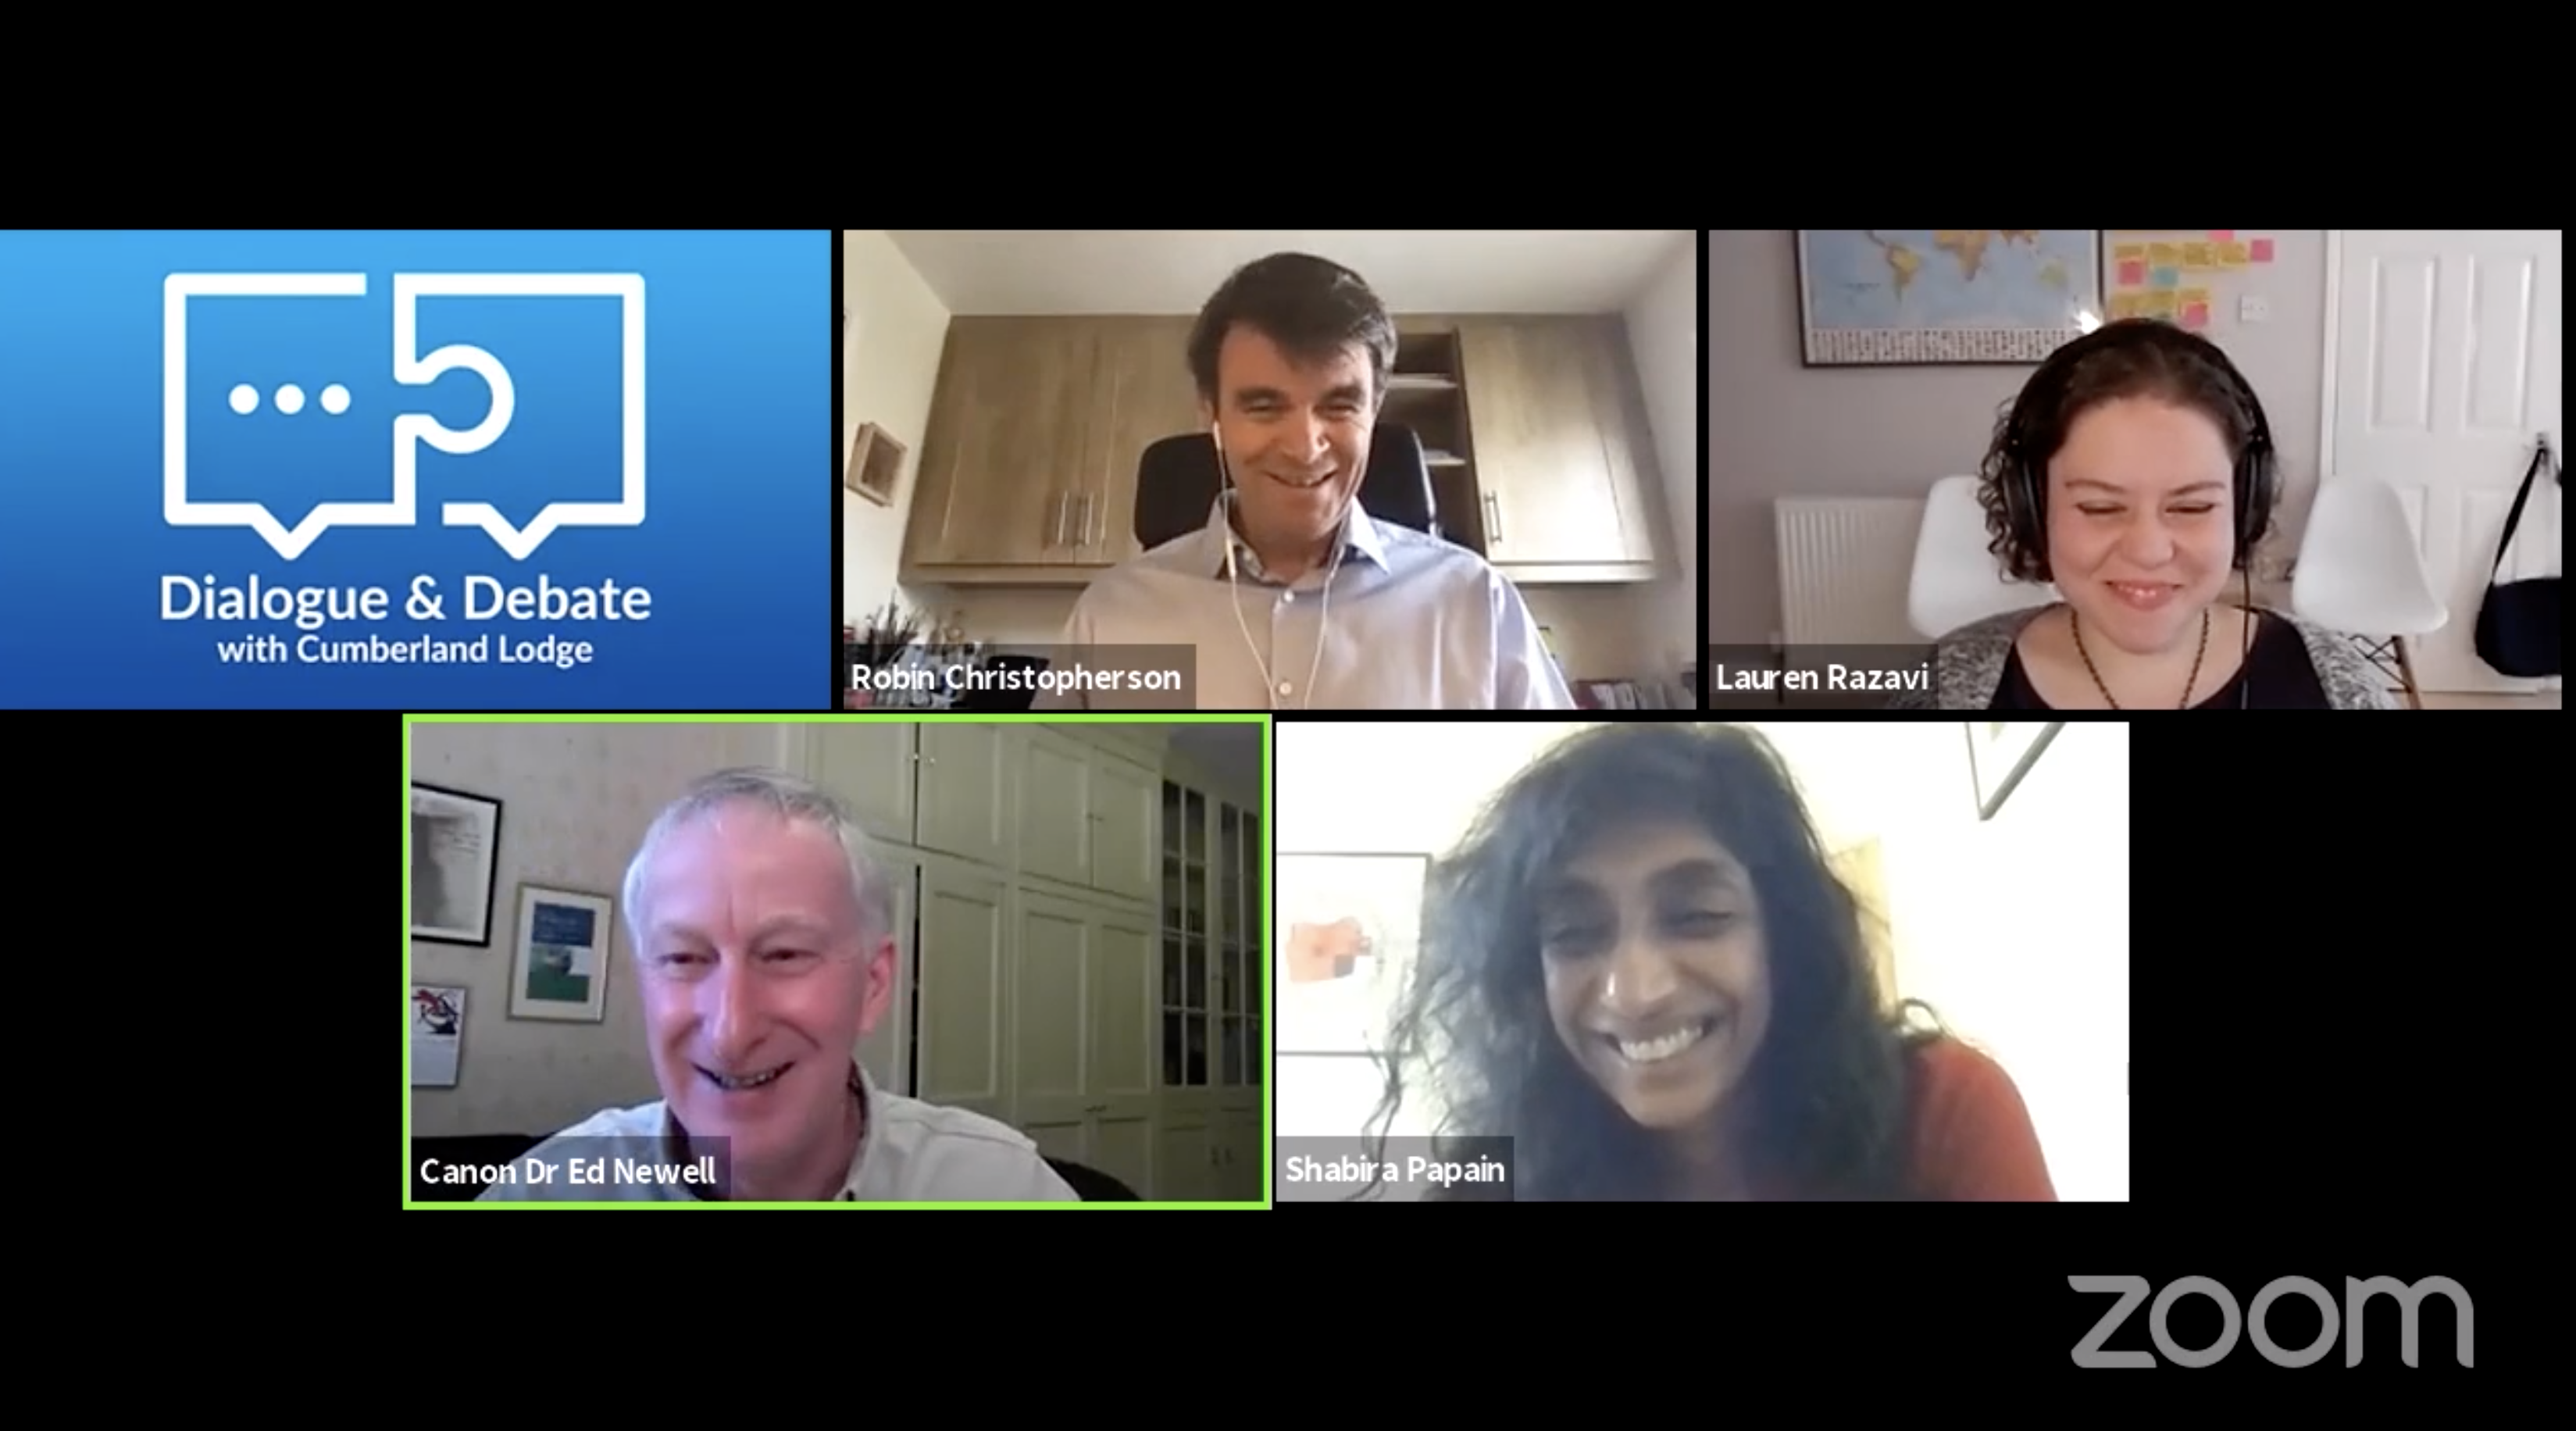 Four expert panellists on a webinar on COVID-19 & the digital divide, delivered via the nicely inclusive Zoom platform